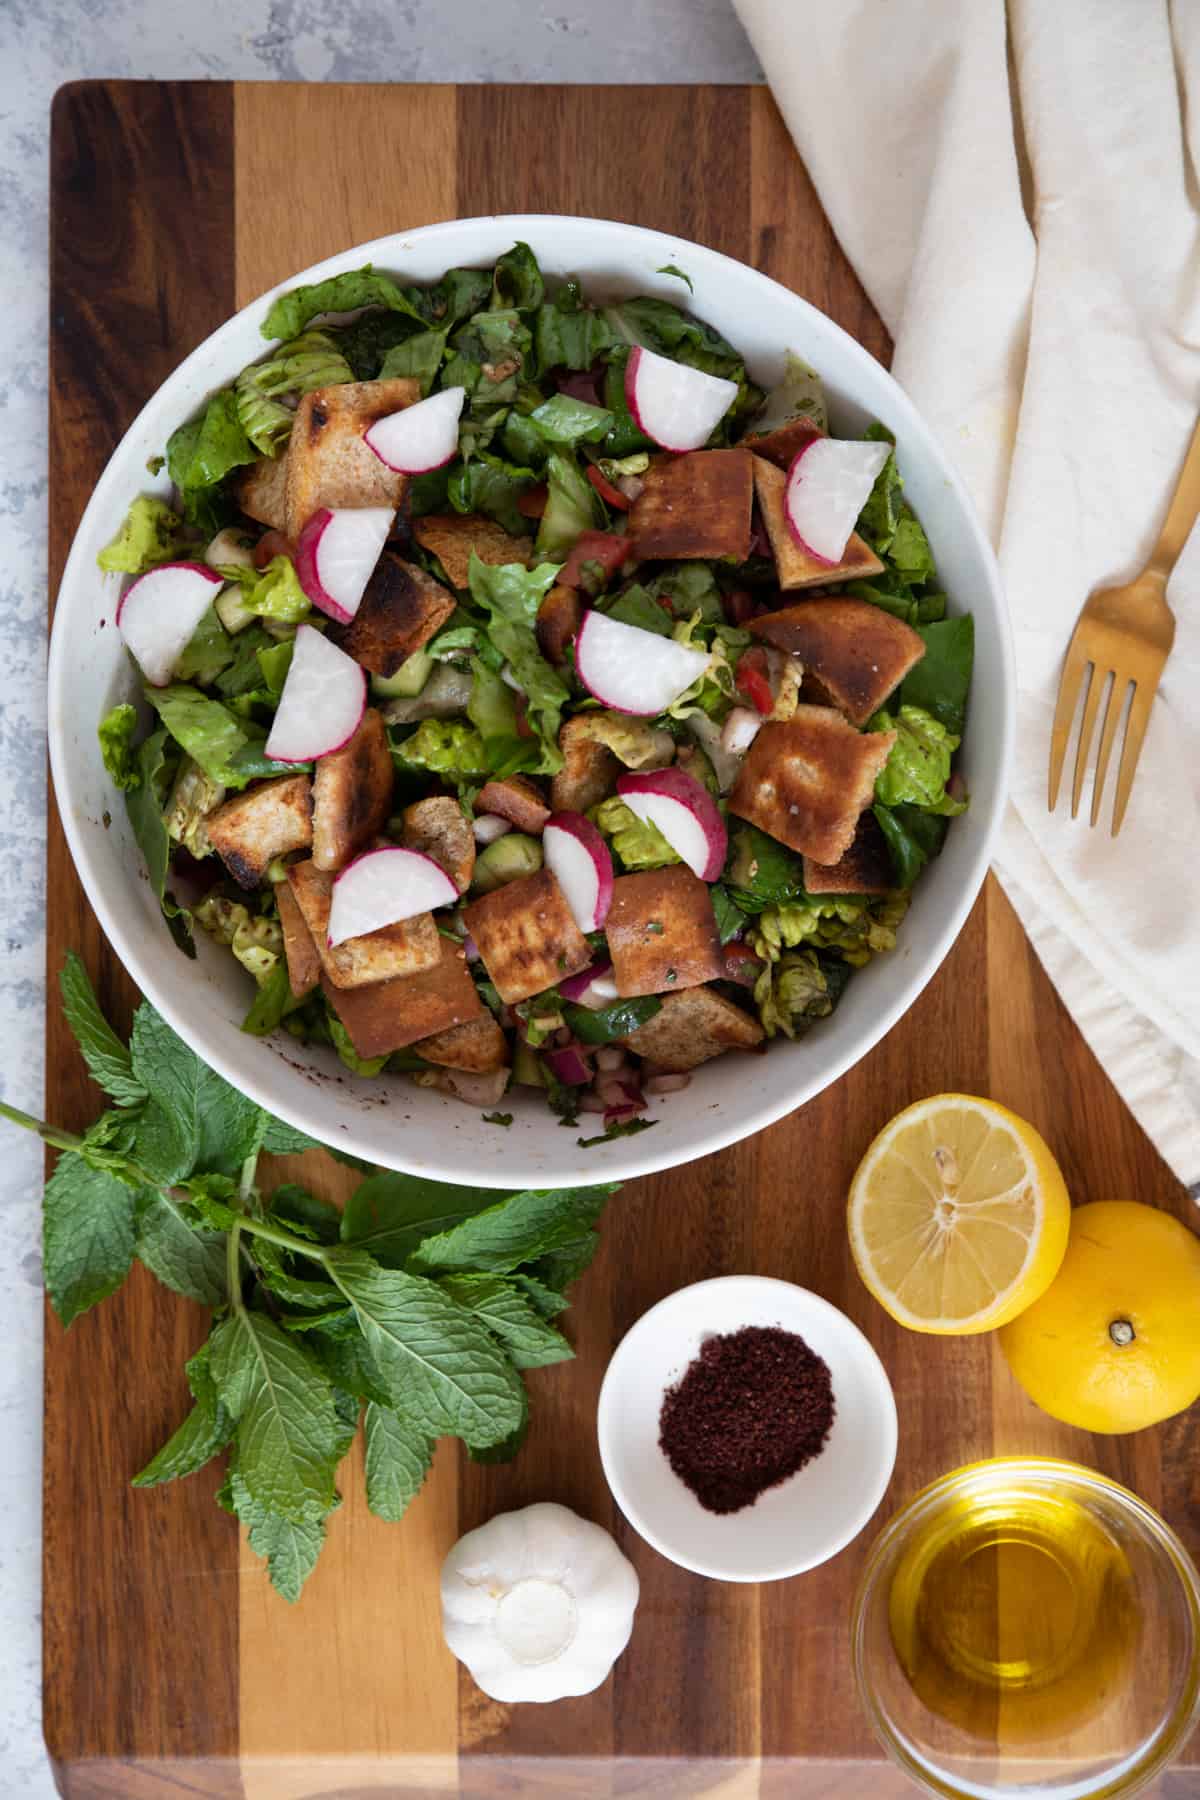 Fattoush is a simple Middle Eastern chopped salad that's perfect for any meal. This Fattoush recipe is easy to follow and uses seasonal fresh ingredients.